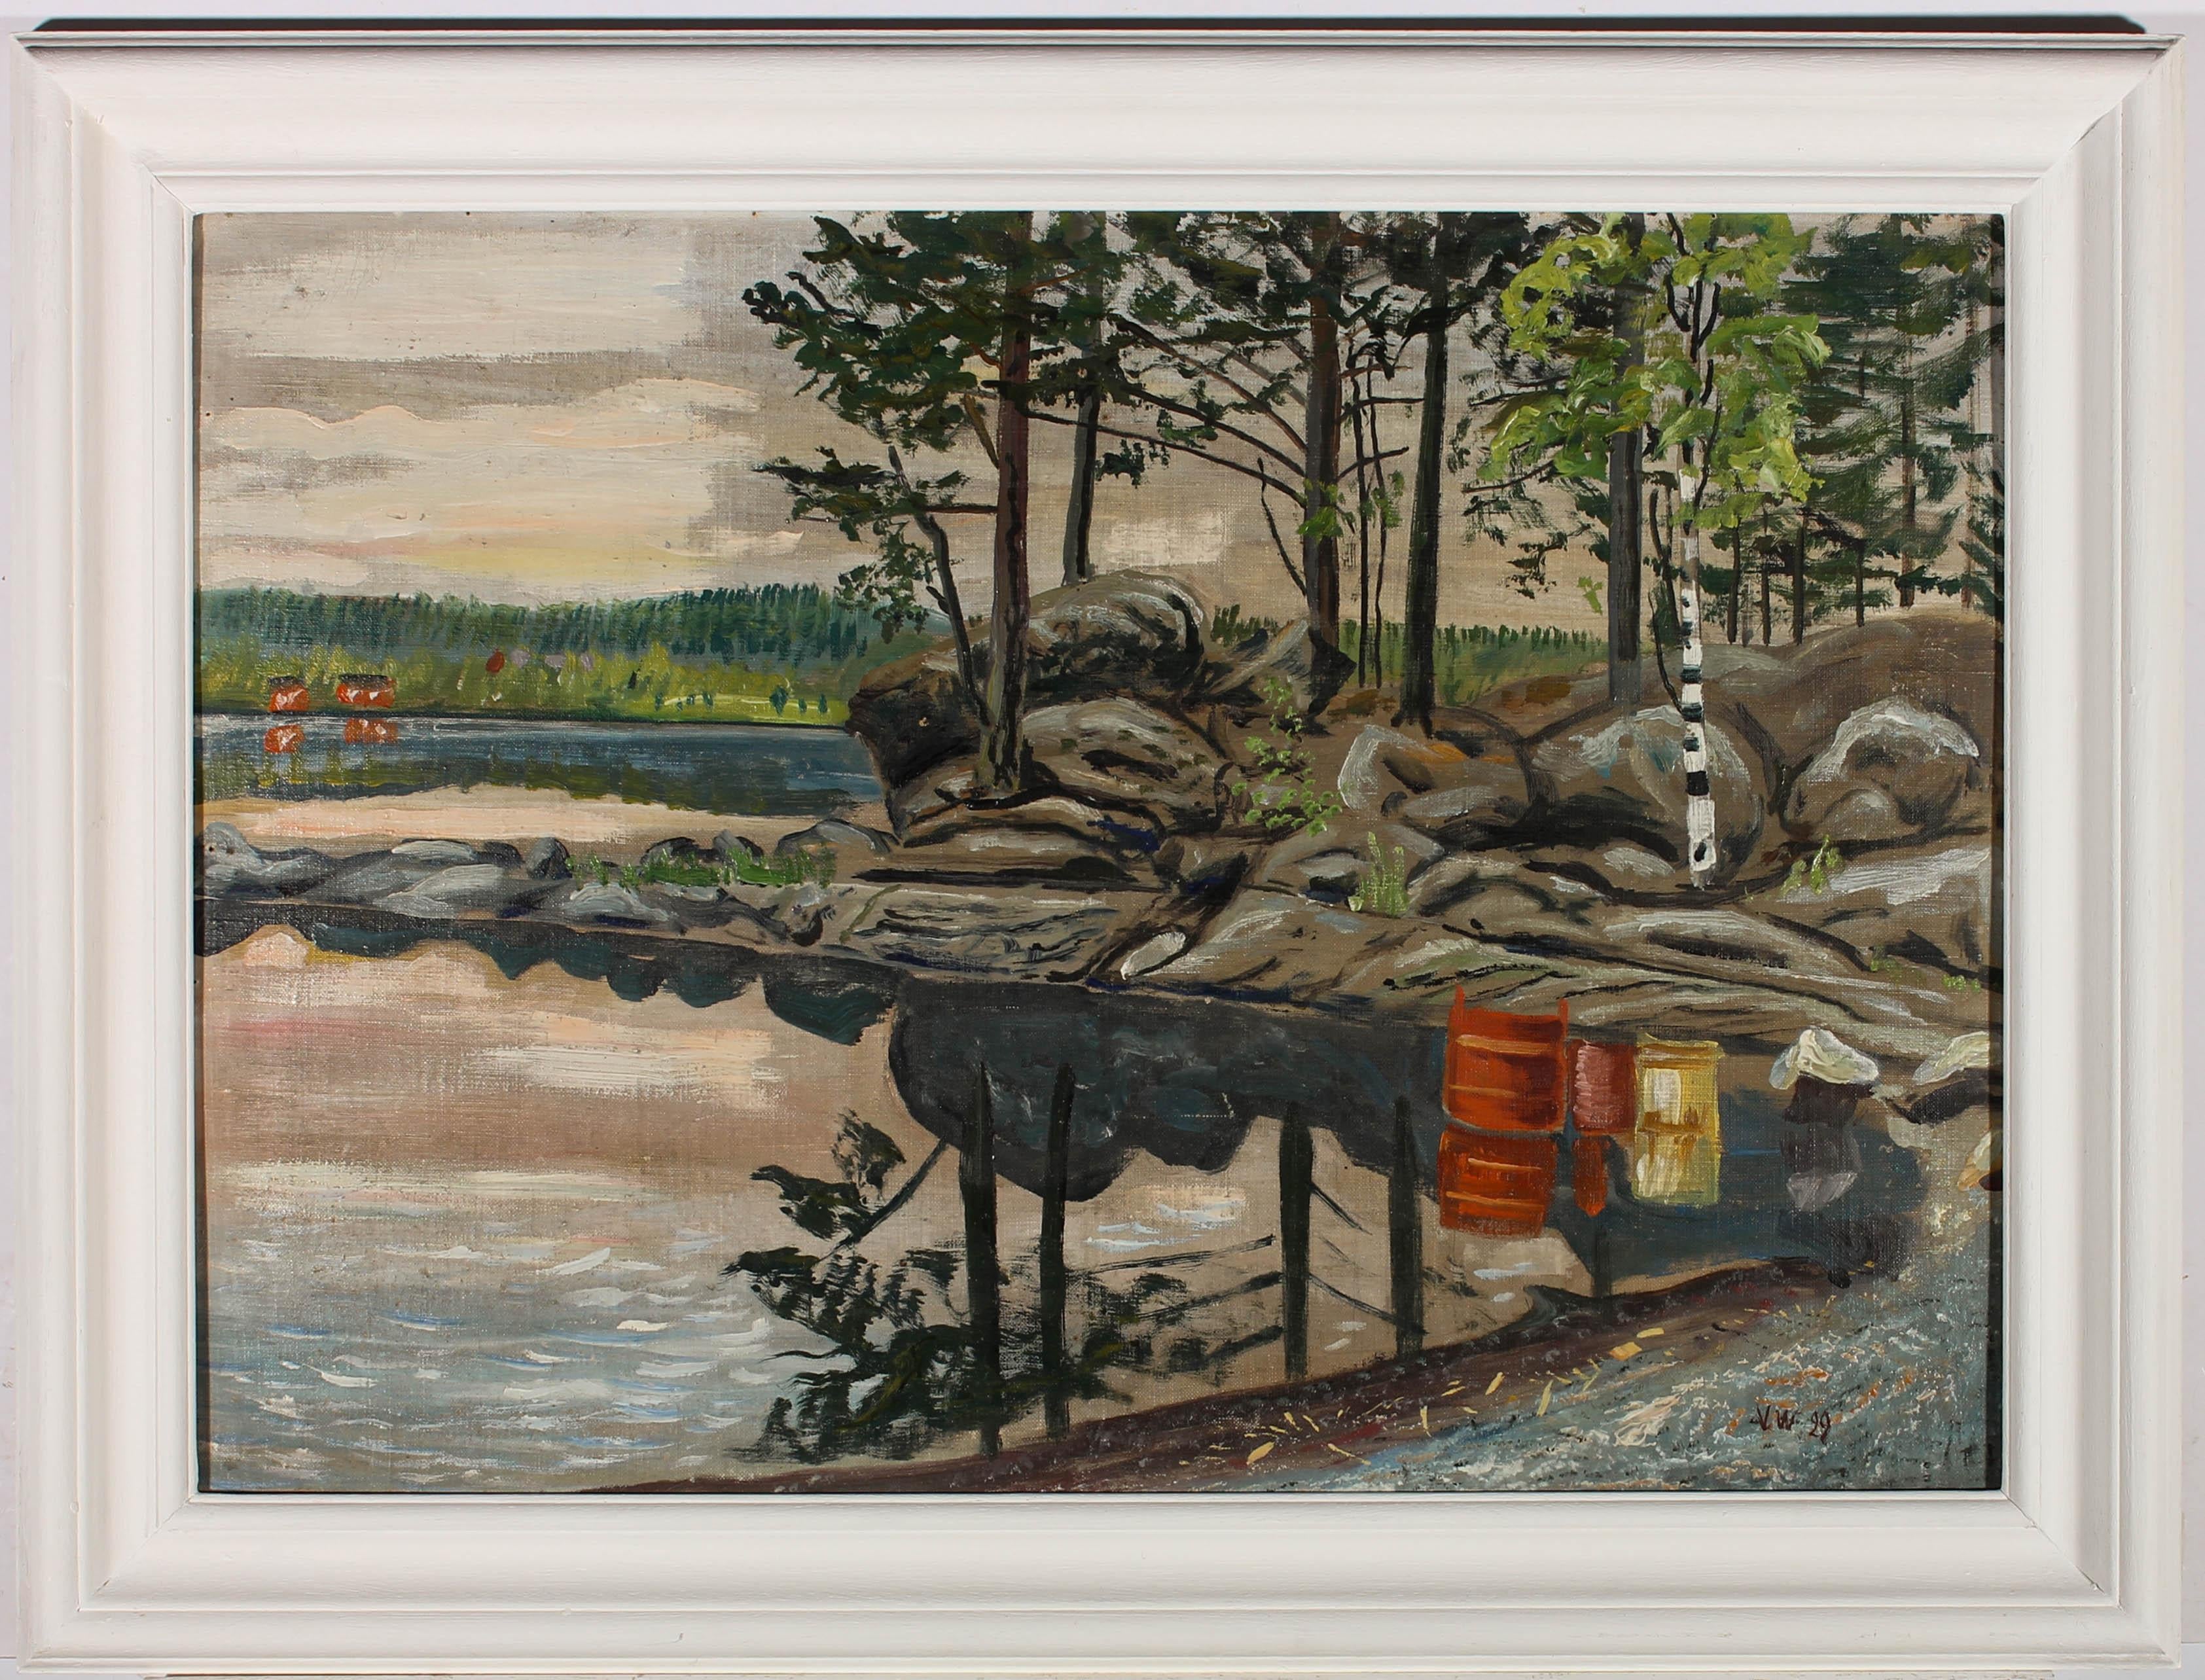 A colourful modernist composition of a serene Scandinavian lake, bordered by a forest of fir trees and boulders. The reflection of the surrounding landscape has been picked up by the artist in the lake's mirror surface. Signed with Monogram.